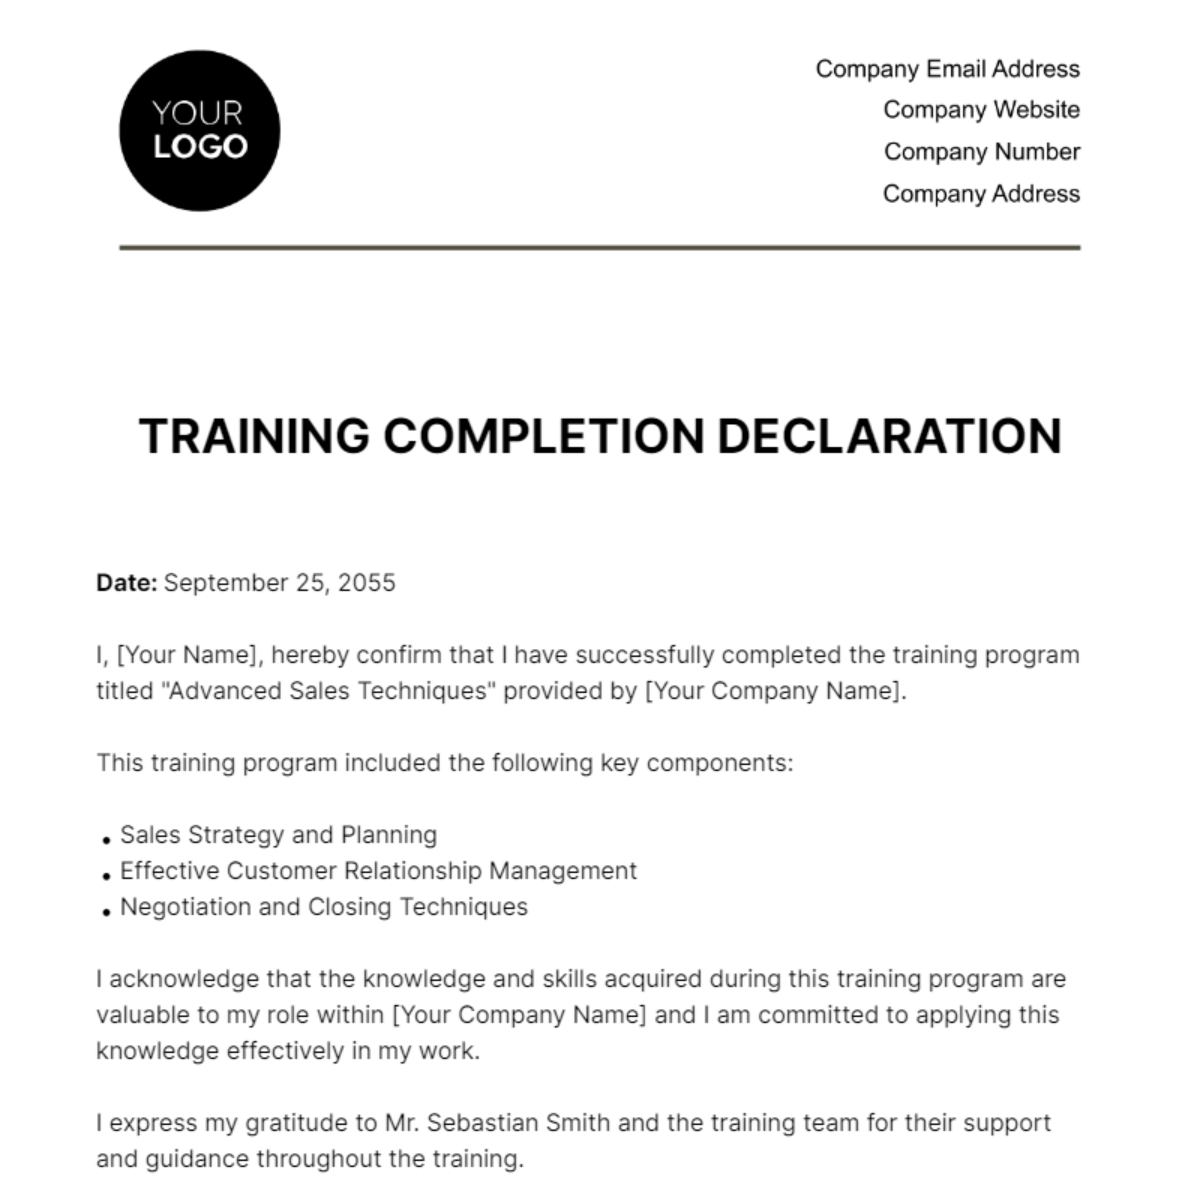 Free Training Completion Declaration HR Template